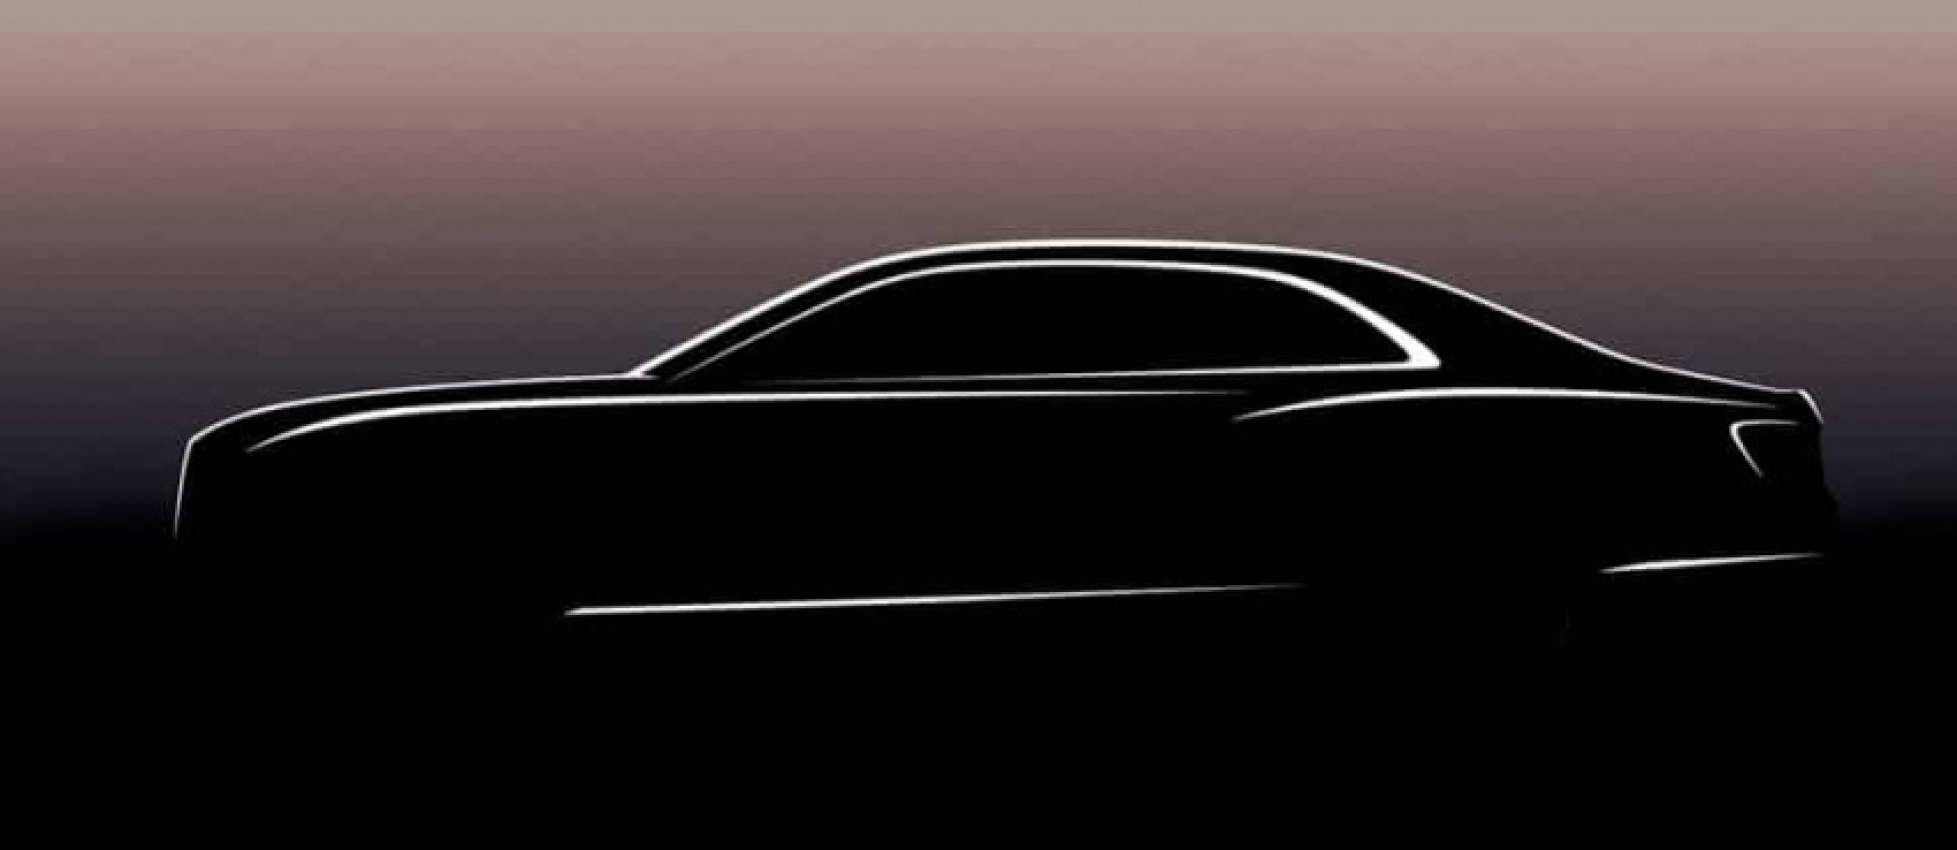 autos, bentley, cars, bentley flying spur, teaser images point to next bentley flying spur